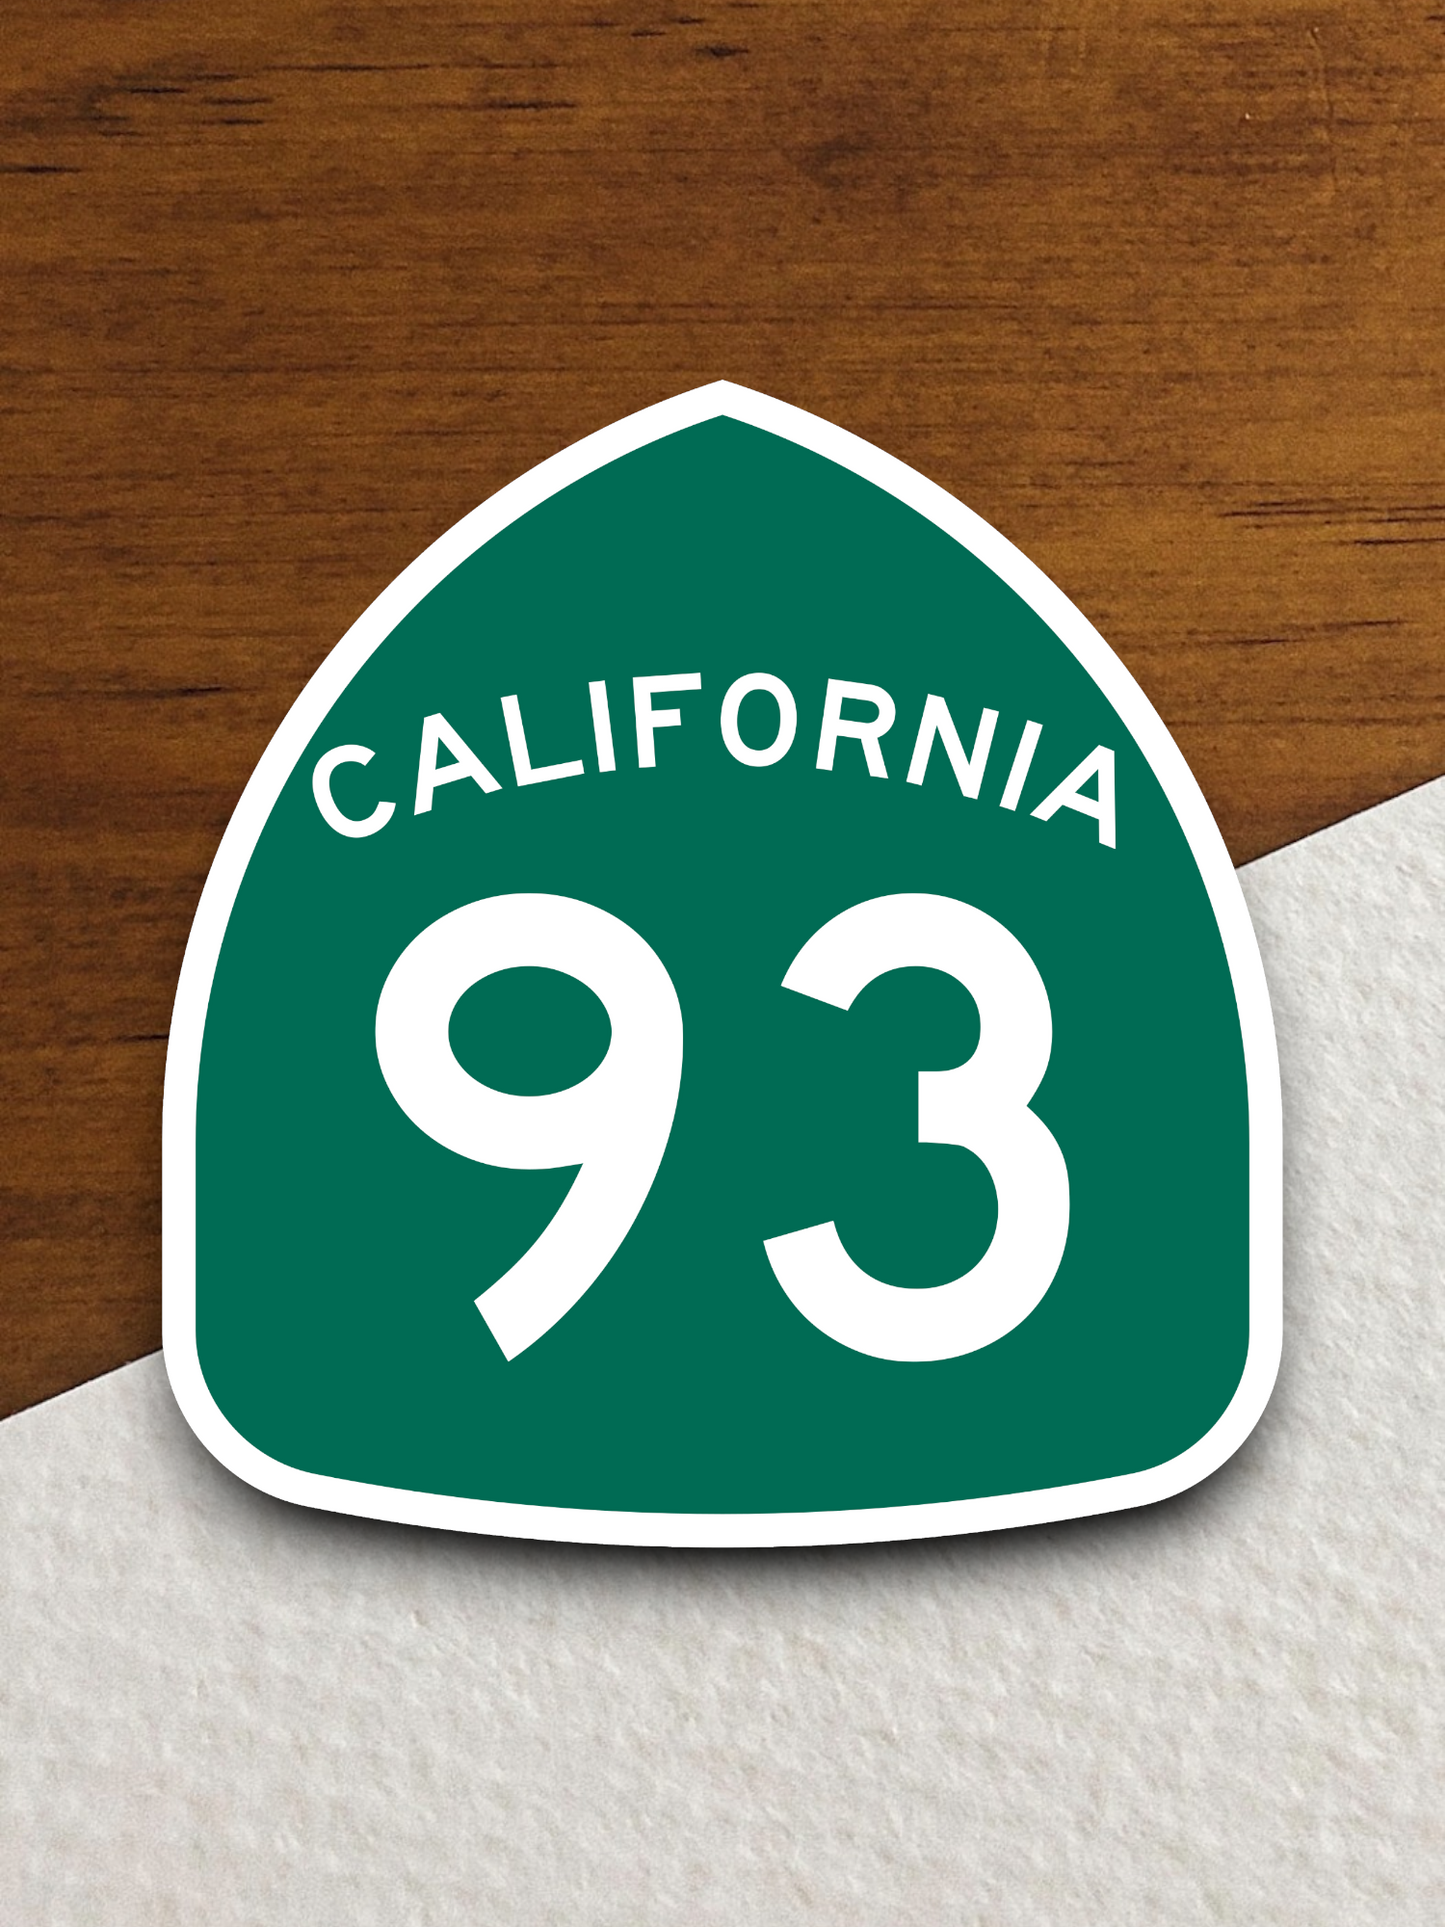 California State Route 93 Road Sign Sticker